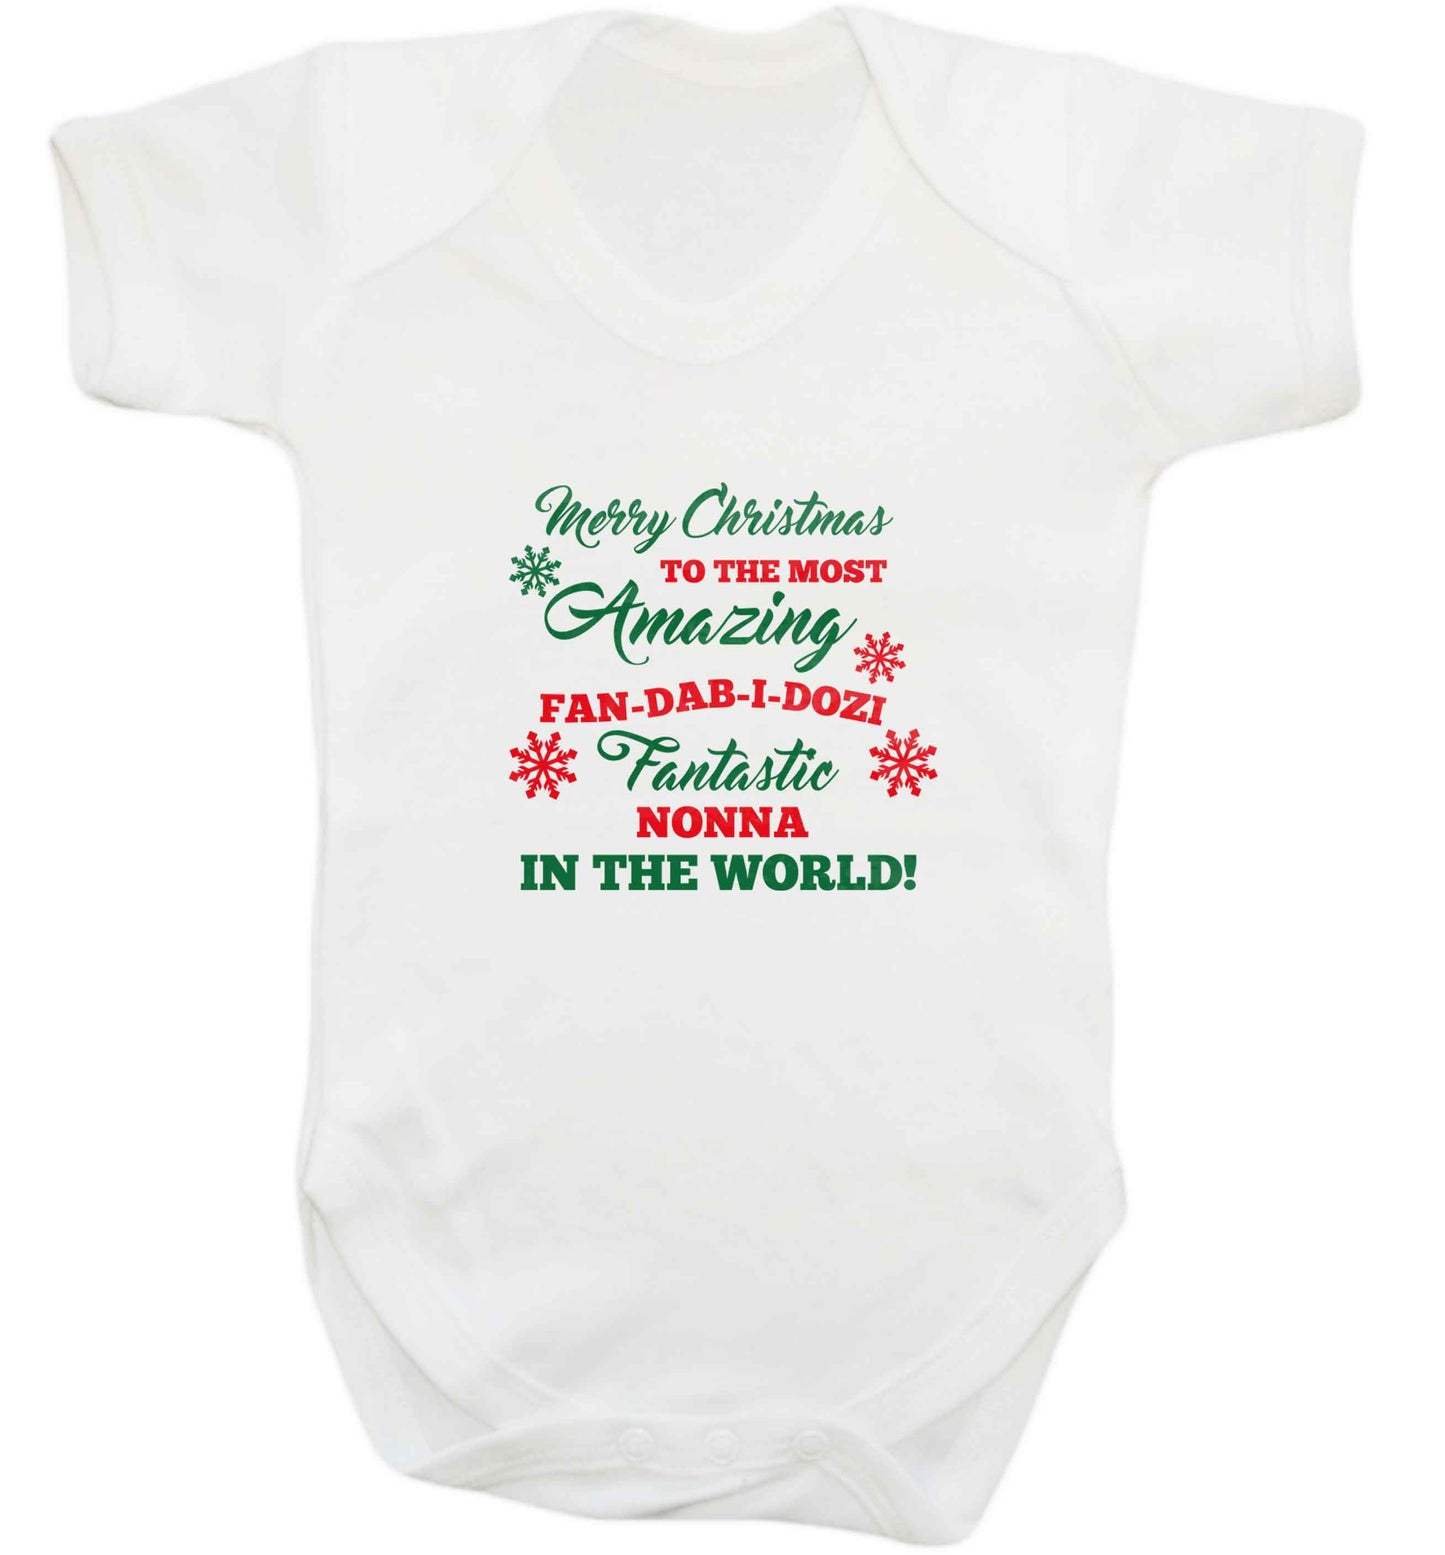 Merry Christmas to the most amazing fan-dab-i-dozi fantasic Nonna in the world baby vest white 18-24 months